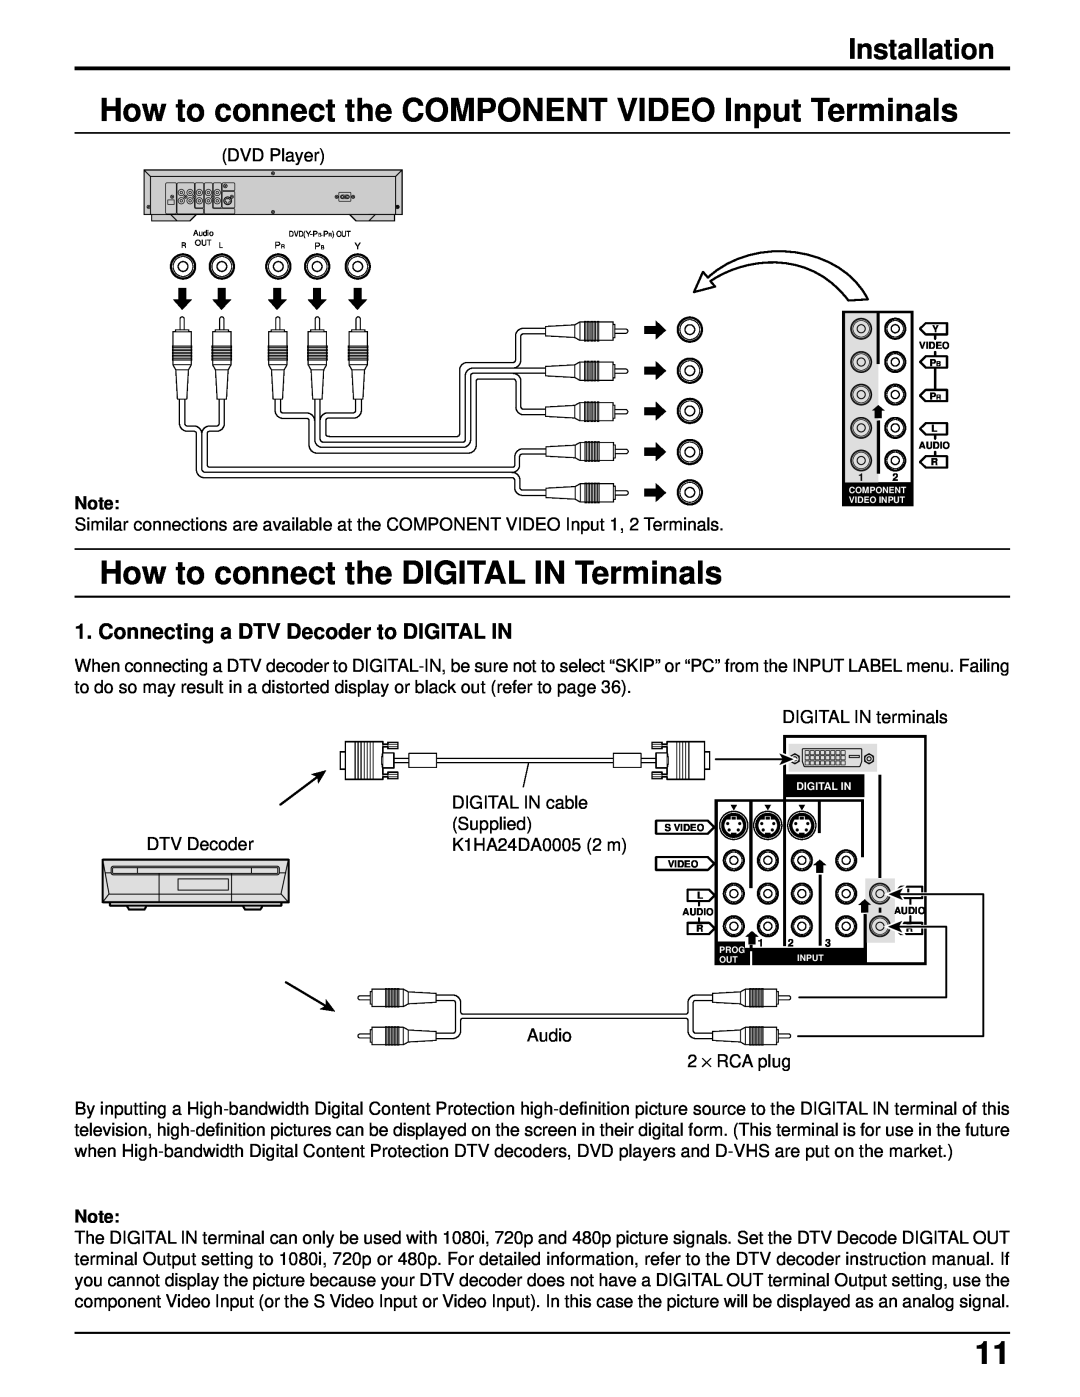 Panasonic PT 52DL52 How to connect the COMPONENT VIDEO Input Terminals, How to connect the DIGITAL IN Terminals, Audio 